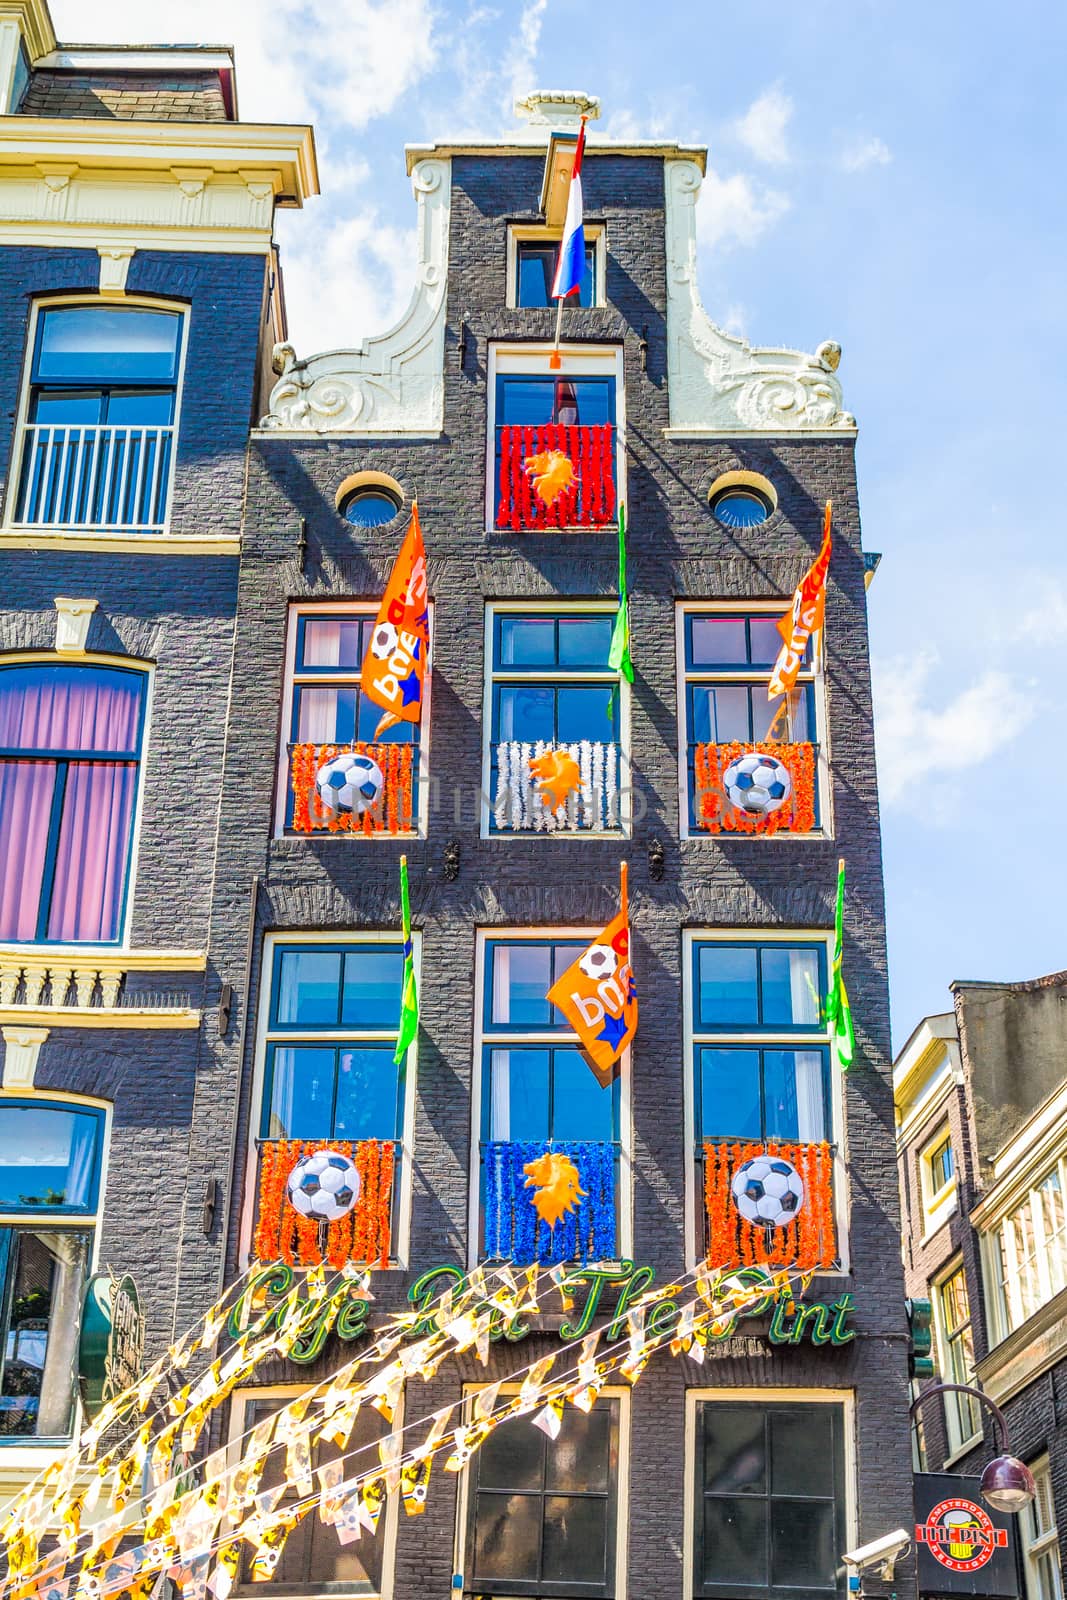 Netherlands. The city is full of orange, the historic national colour of the Netherlands.